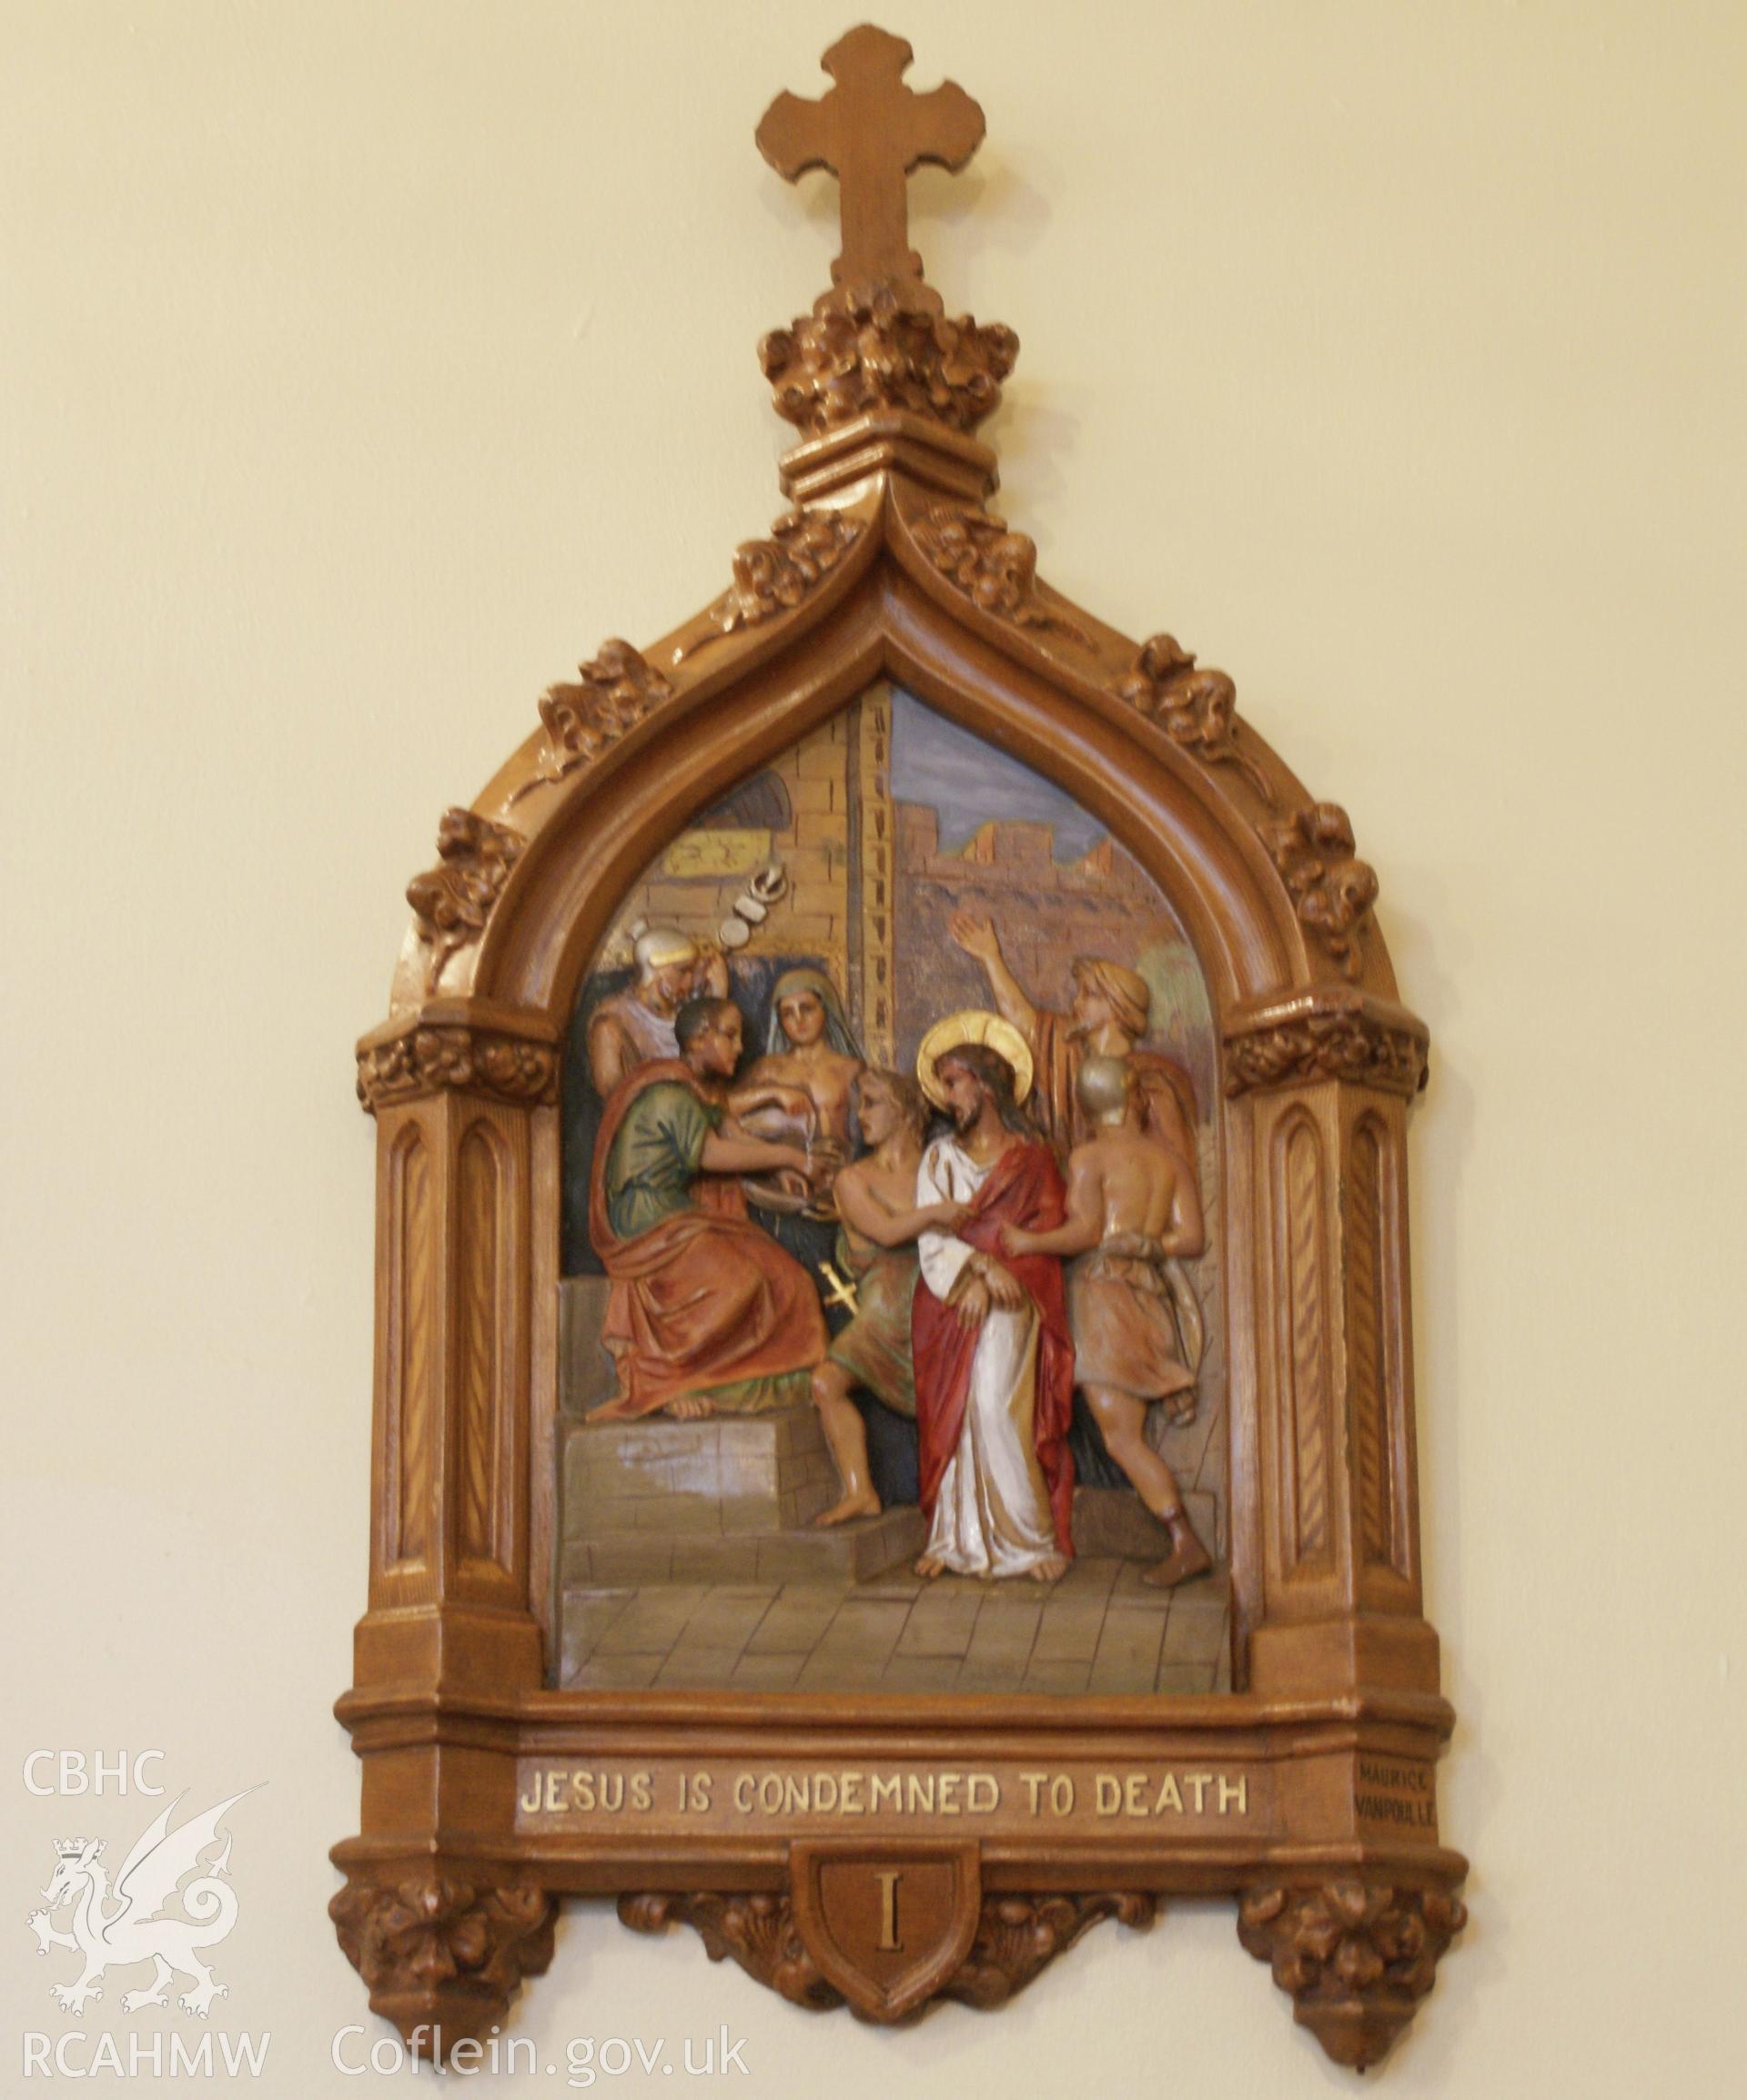 Digital colour photograph showing one of the Stations of the Cross at Sacred Heart and St Felix Catholic church, Blaenavon.